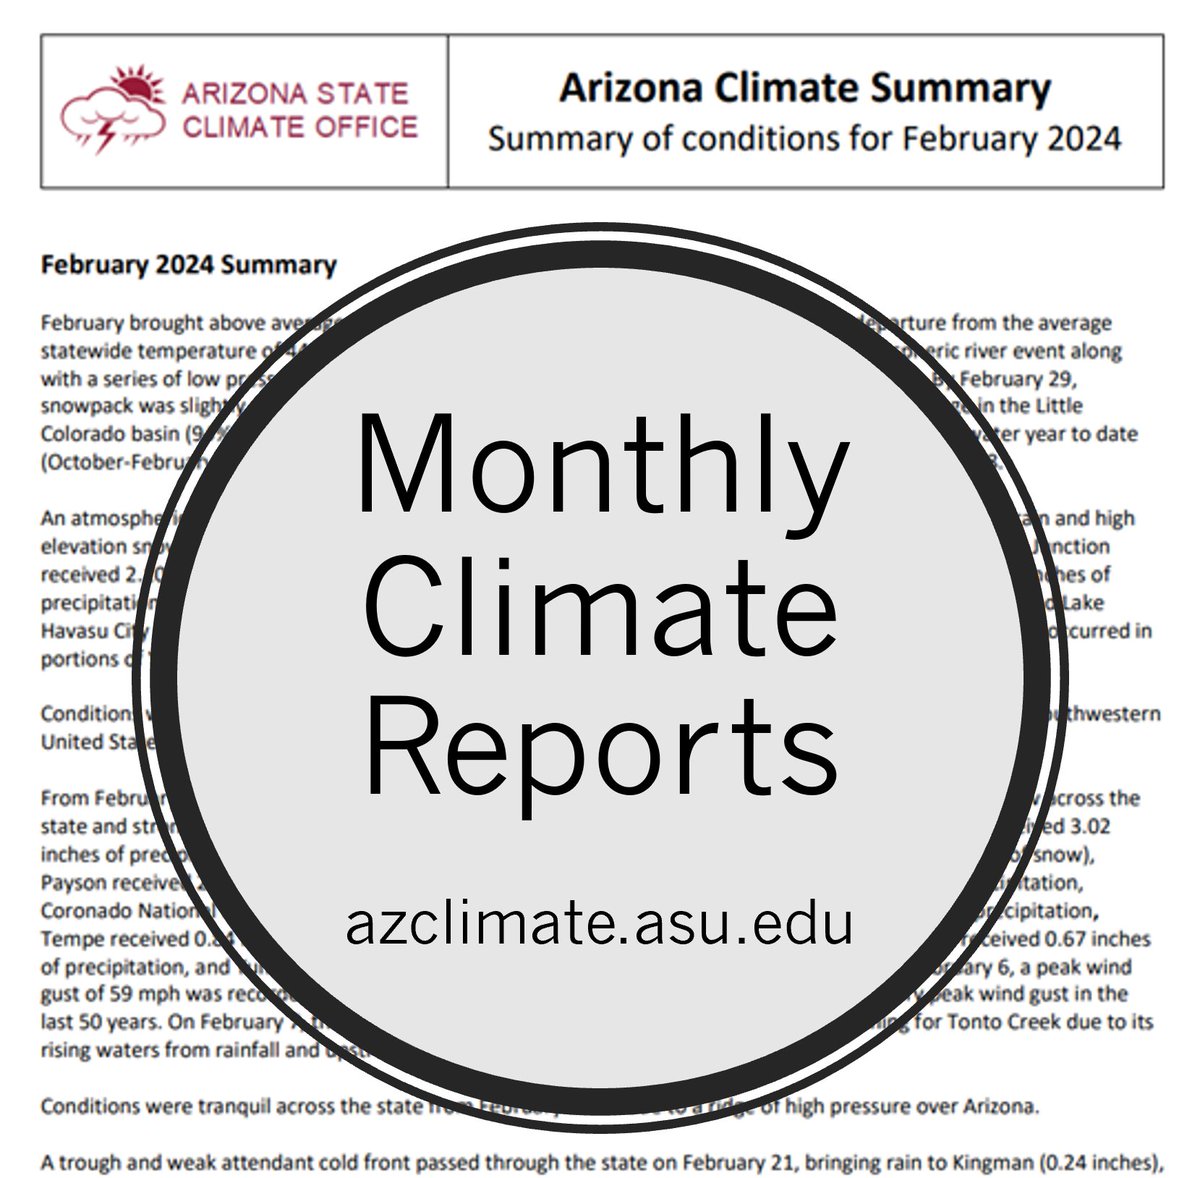 February is up! Read all about the dust storm, heavy snow, and more exciting February weather in the monthly climate report! ❄️💦⚡️ azclimate.asu.edu/arizona-monthl… #azwx